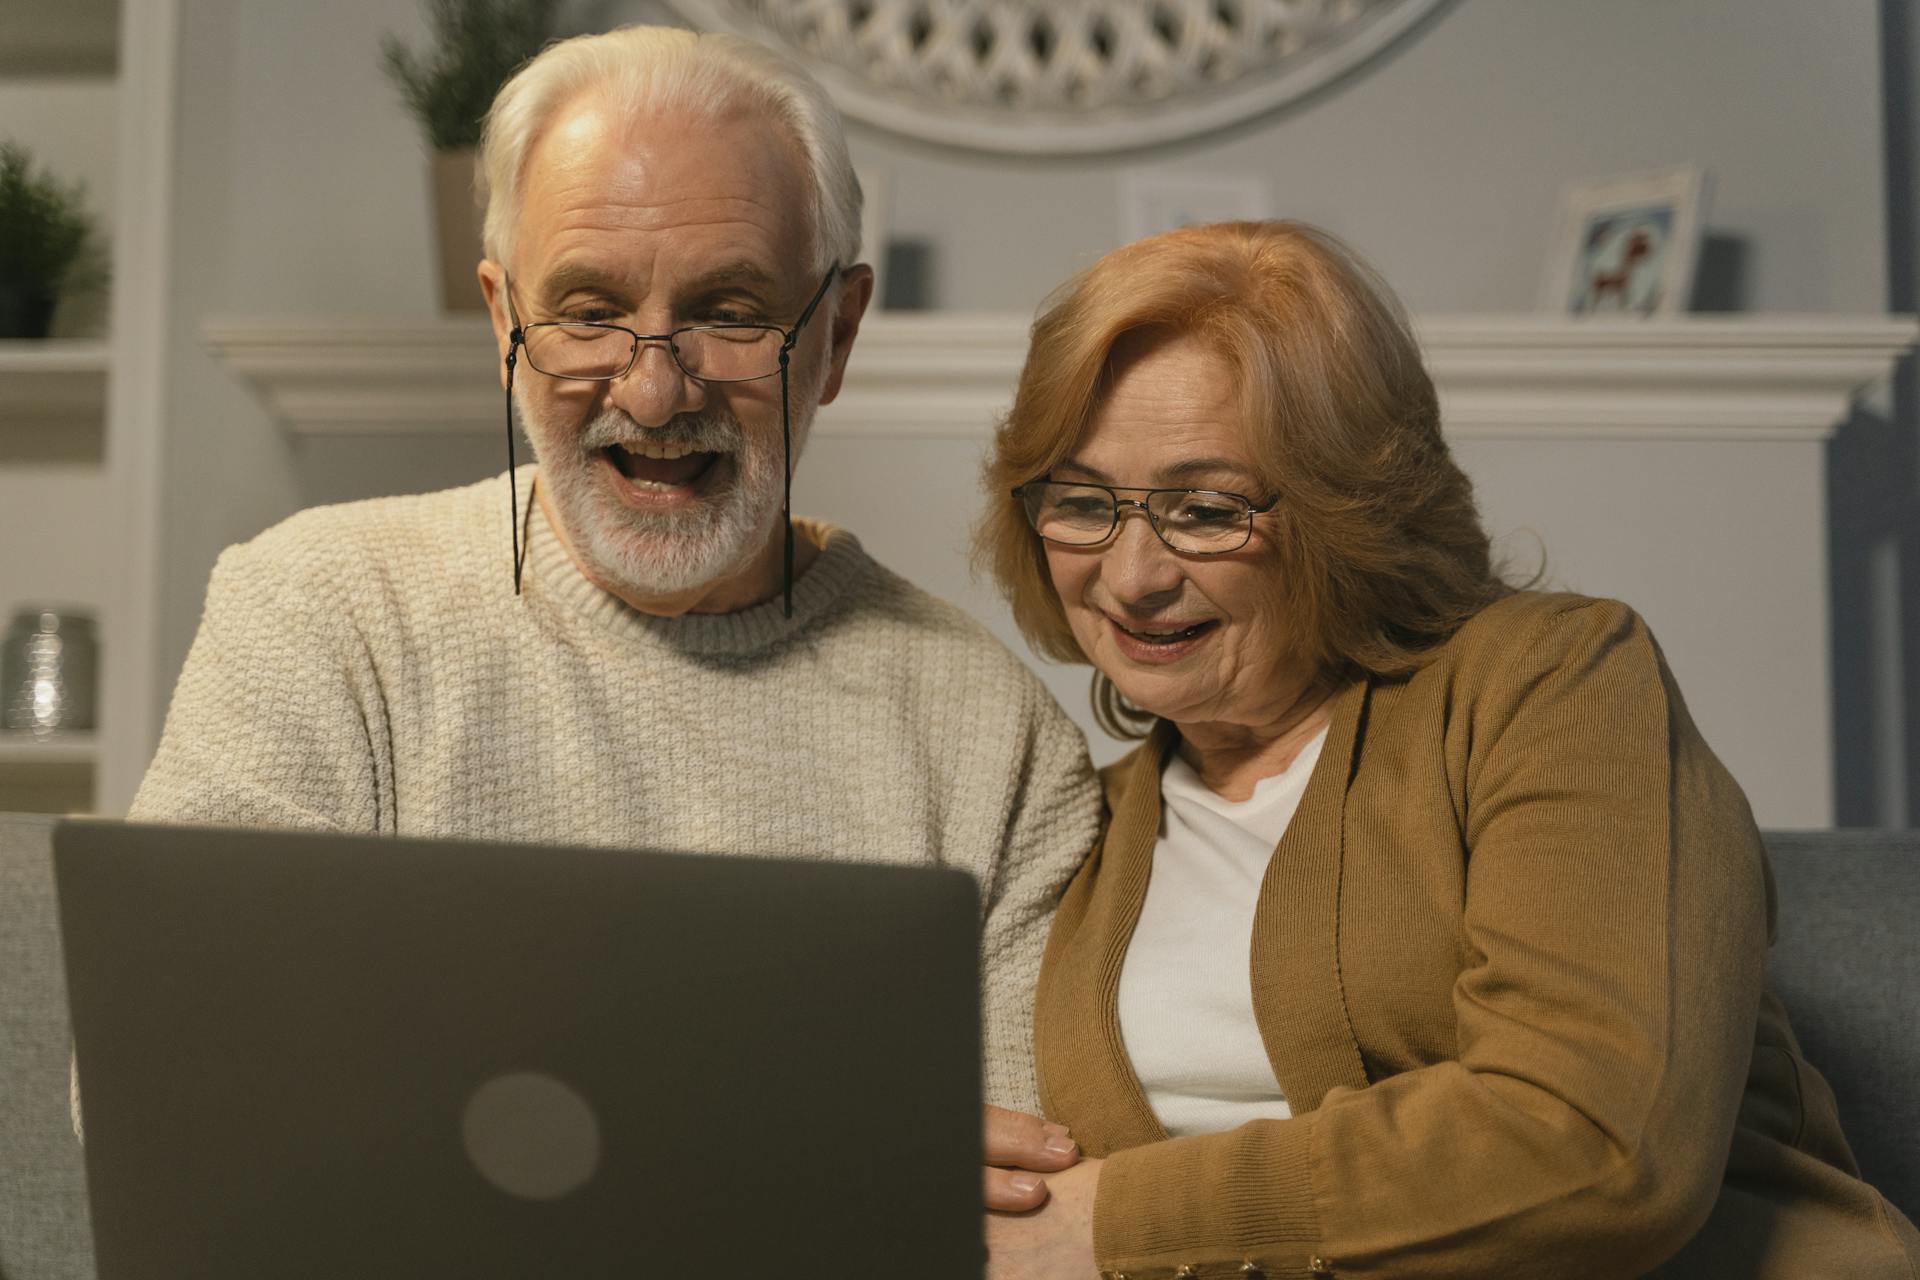 An elderly couple staring at the laptop screen | Source: Pexels